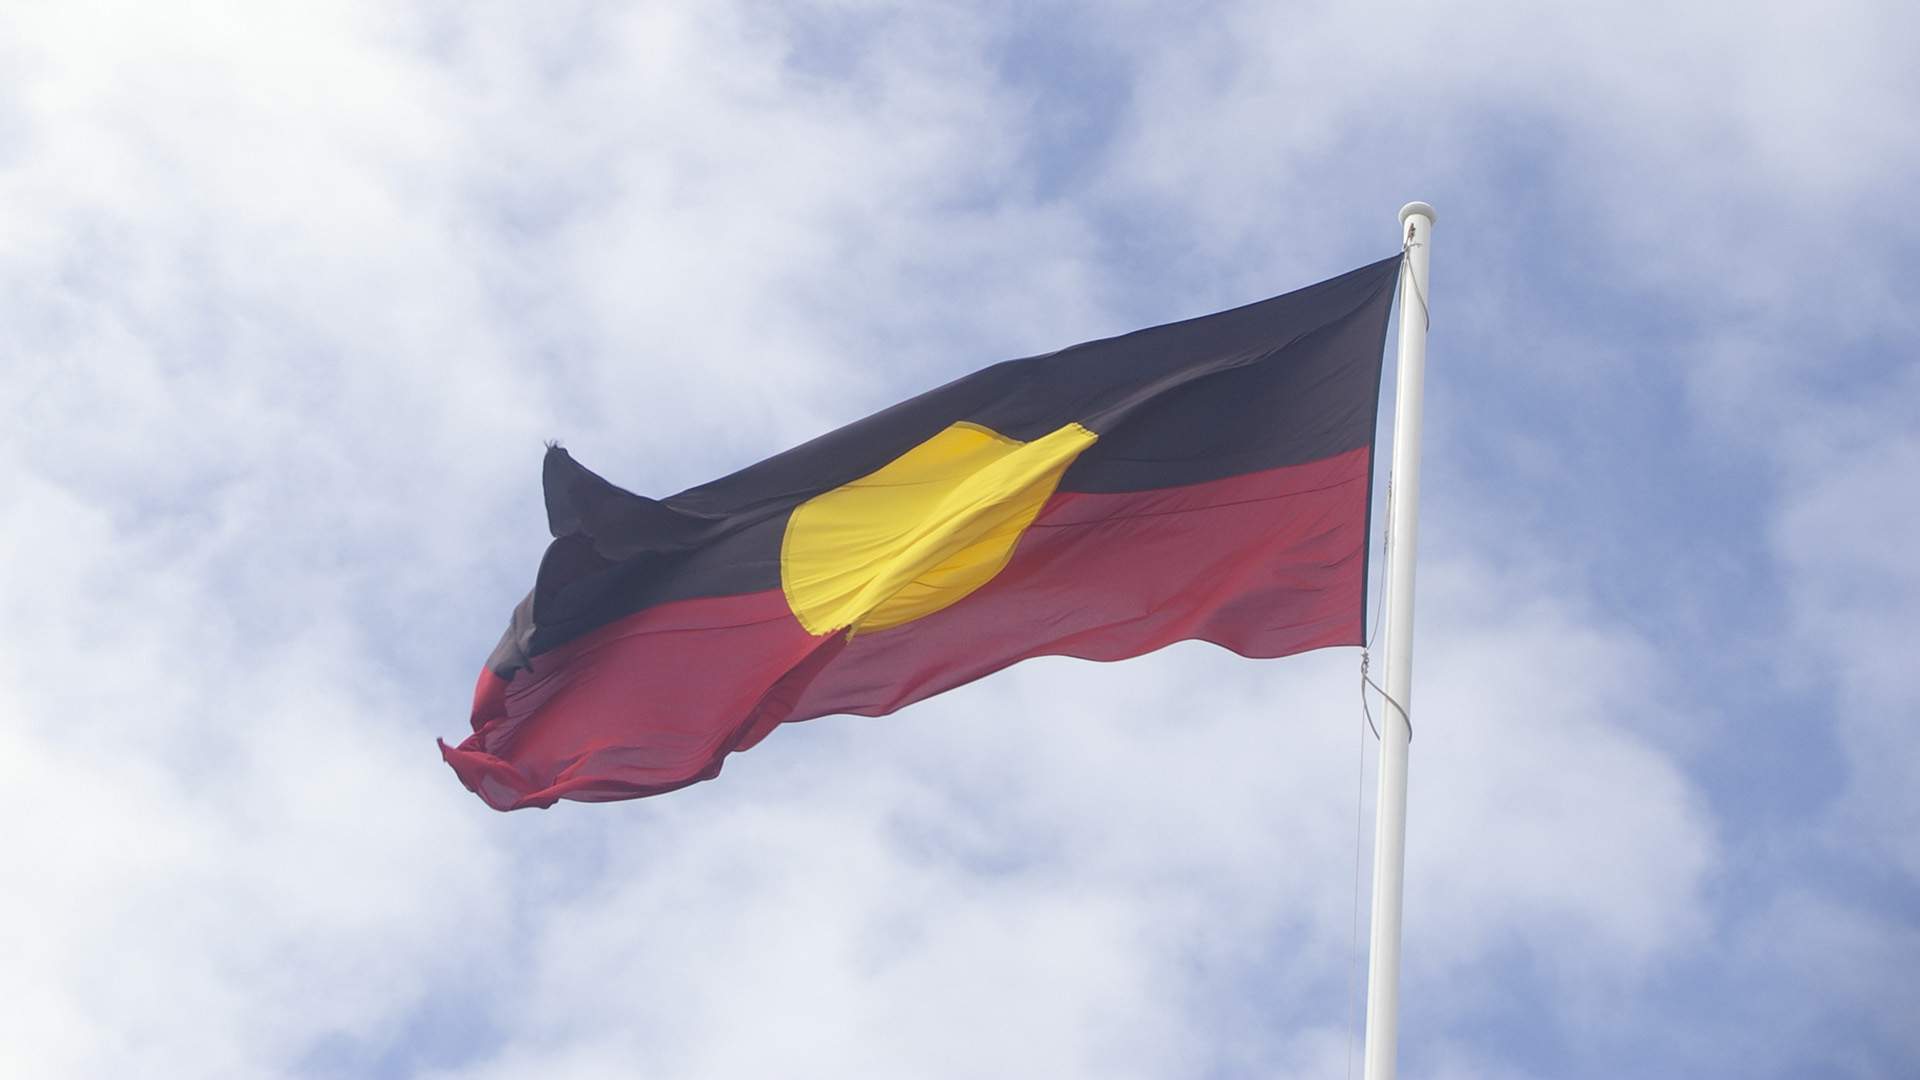 The Aboriginal Flag Is Now Flying Permanently on Top of the West Gate Bridge